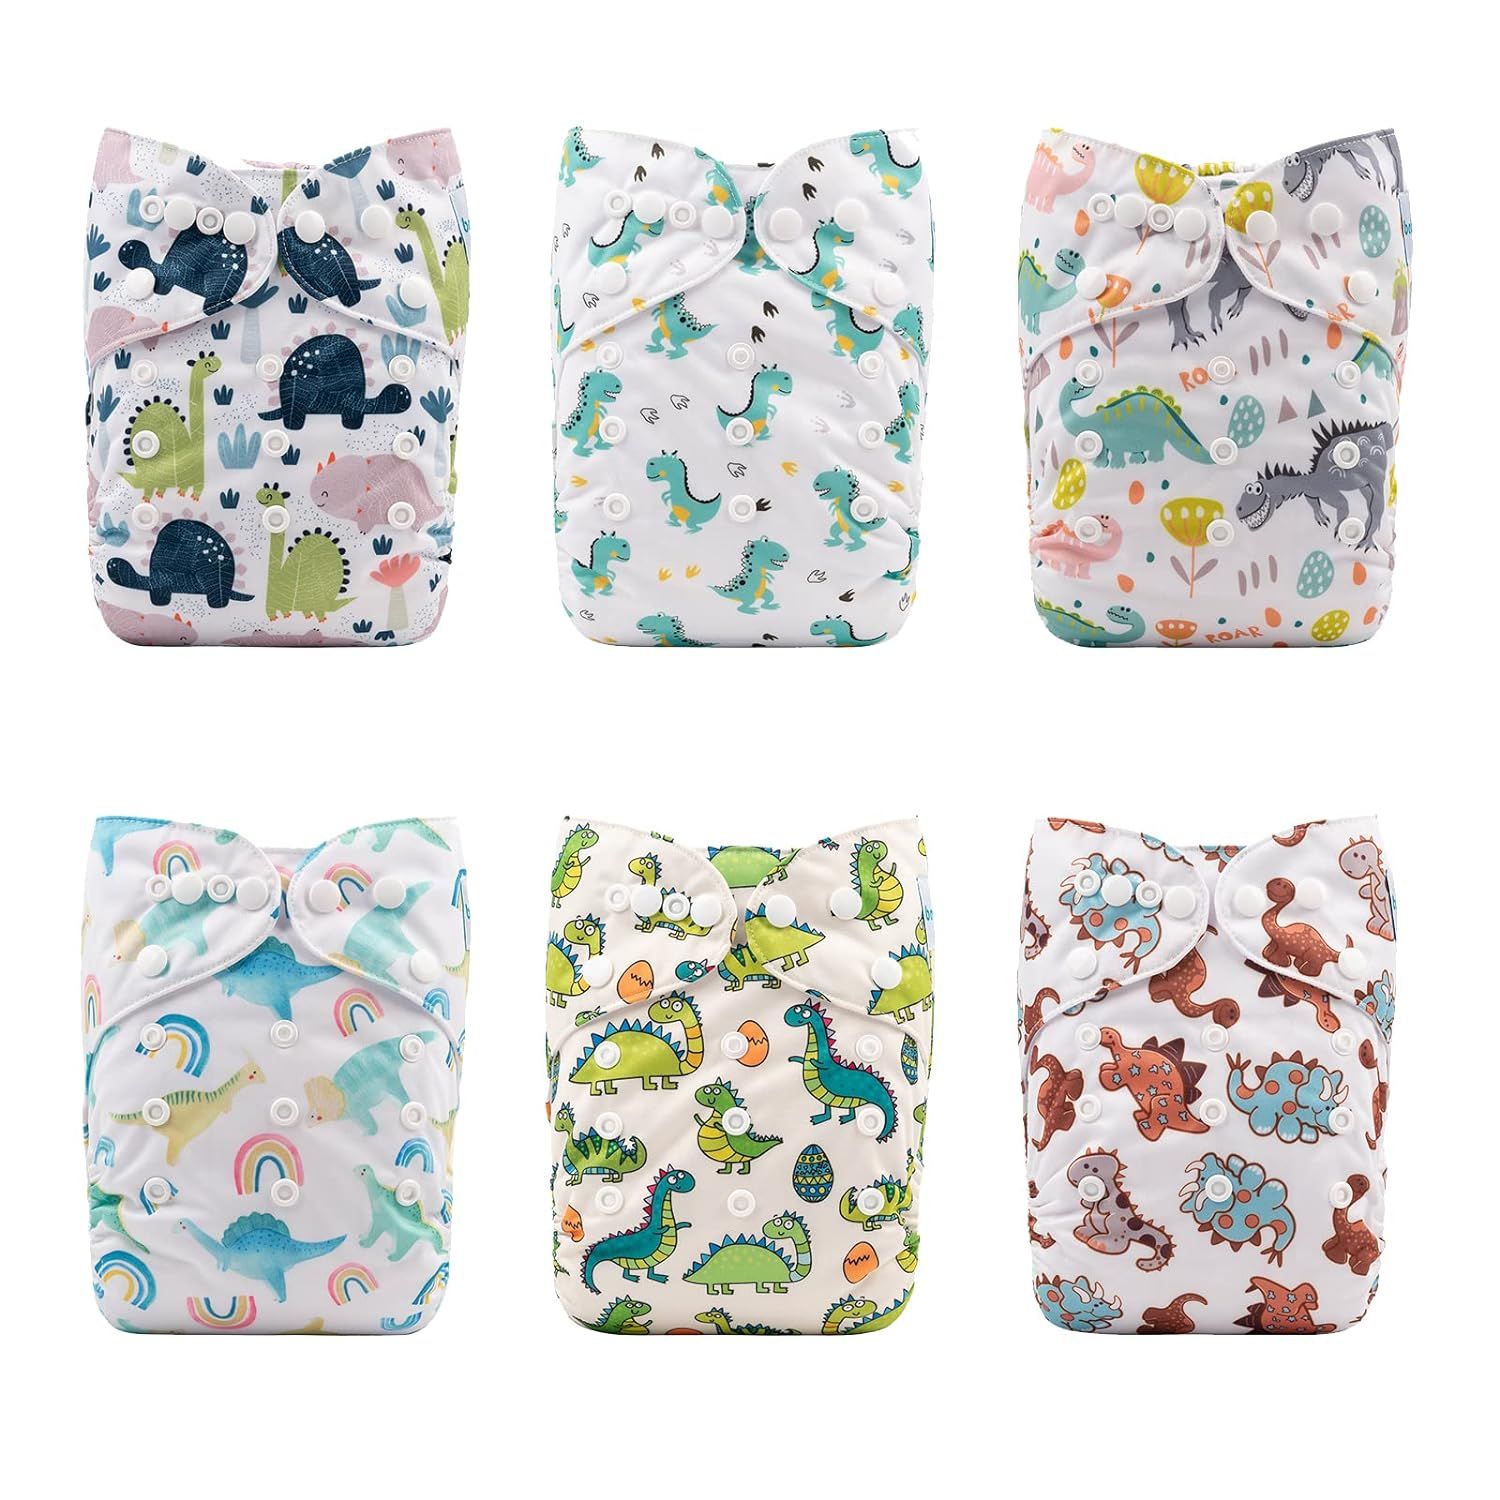 Avoid Leaks, Get the Perfect Fit on Your Cloth Diaper – Nora's Nursery